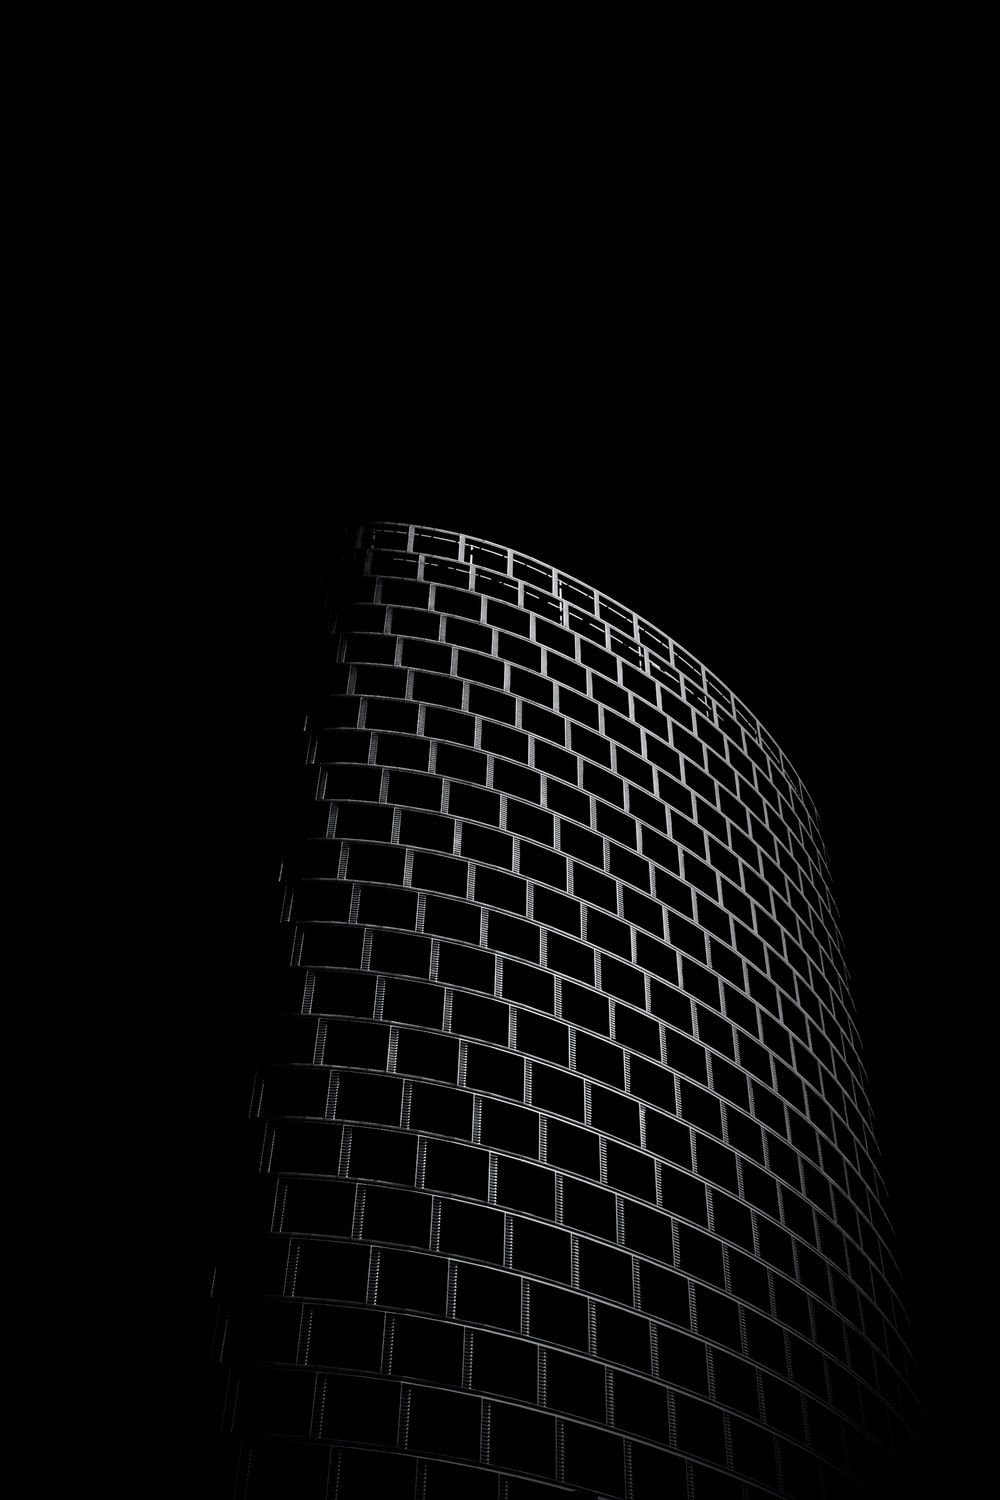 AMOLED Wallpaper [Free Download!]. best free wallpaper, black and white, black, and dark photo